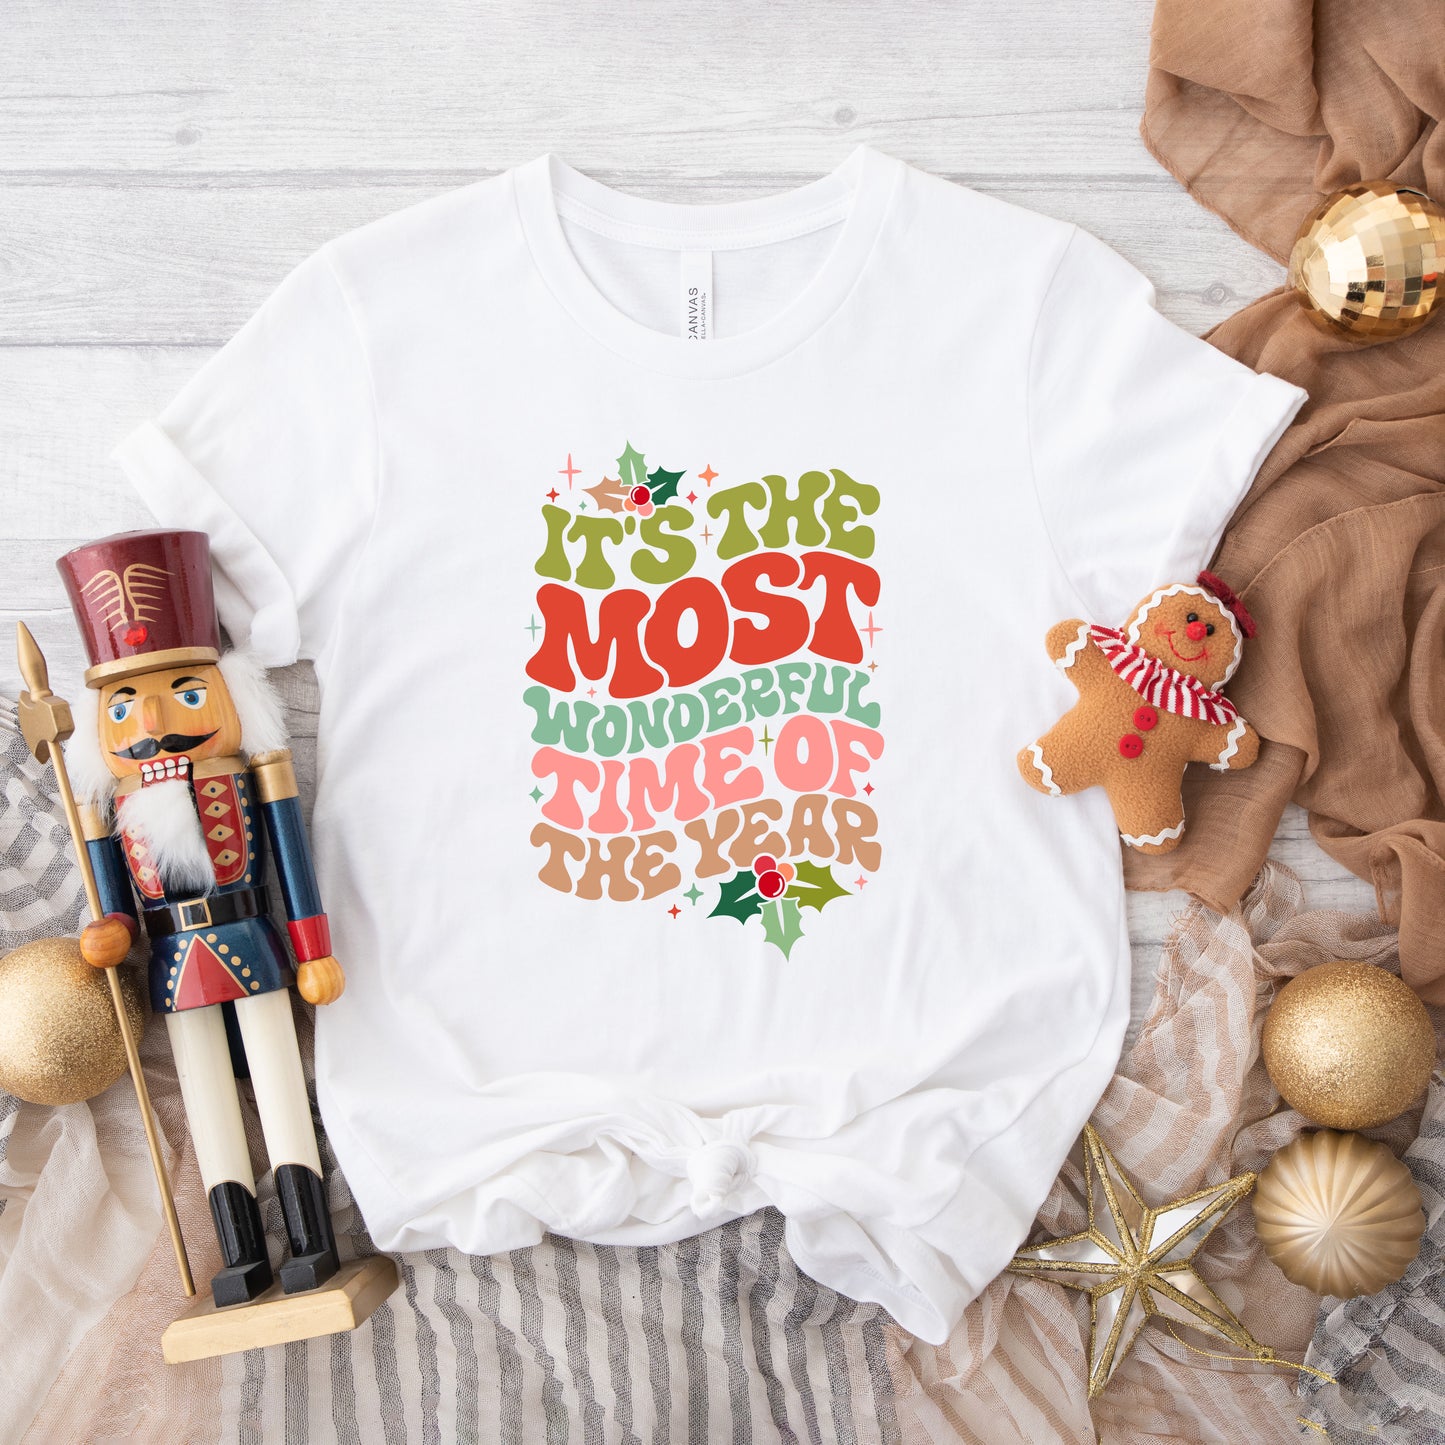 Most Wonderful Time of Year Holly | Short Sleeve Crew Neck